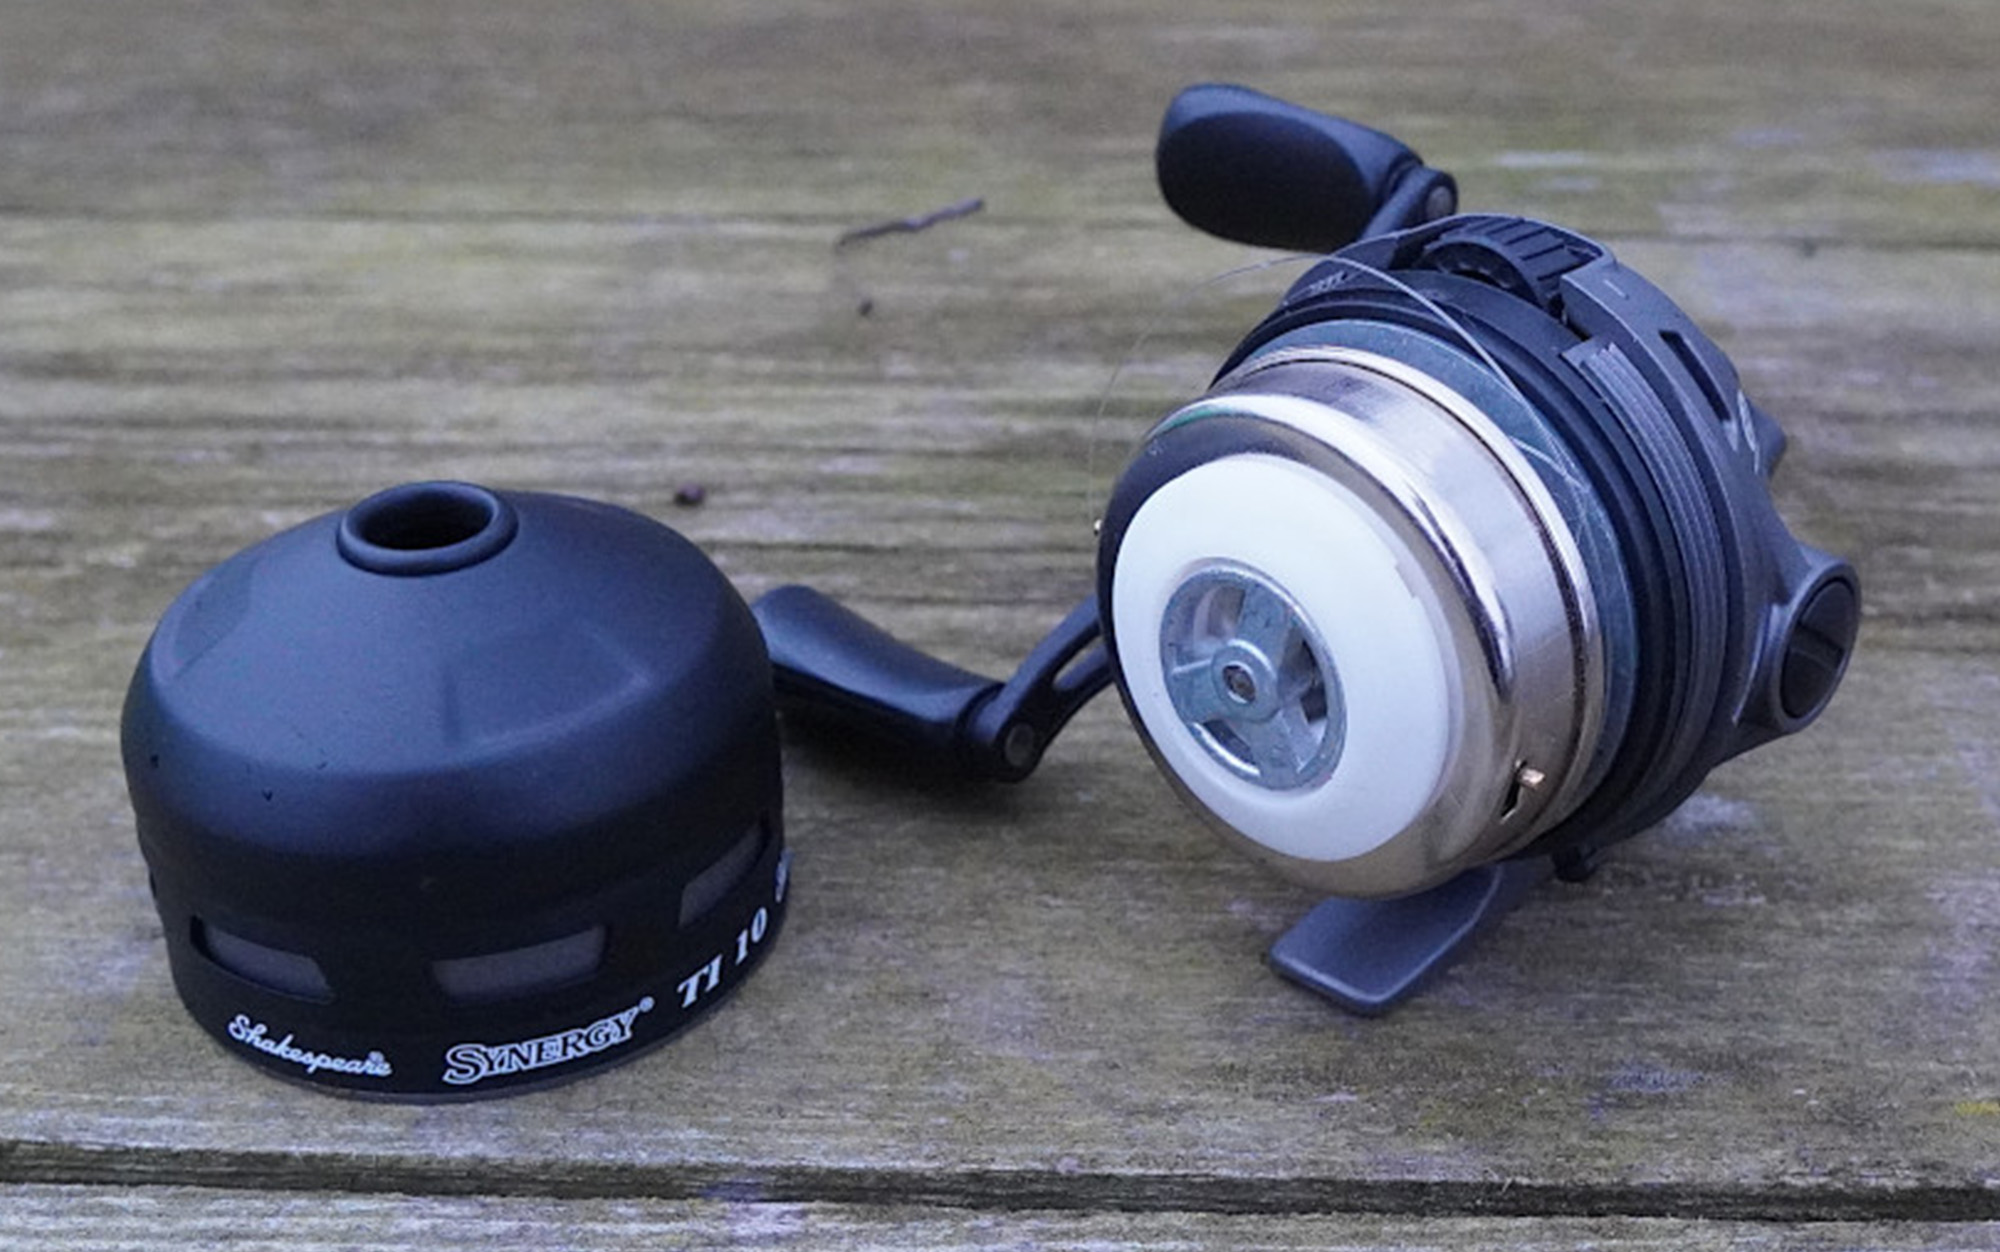 The TI has better components than expected for a sub-$20 reel. 